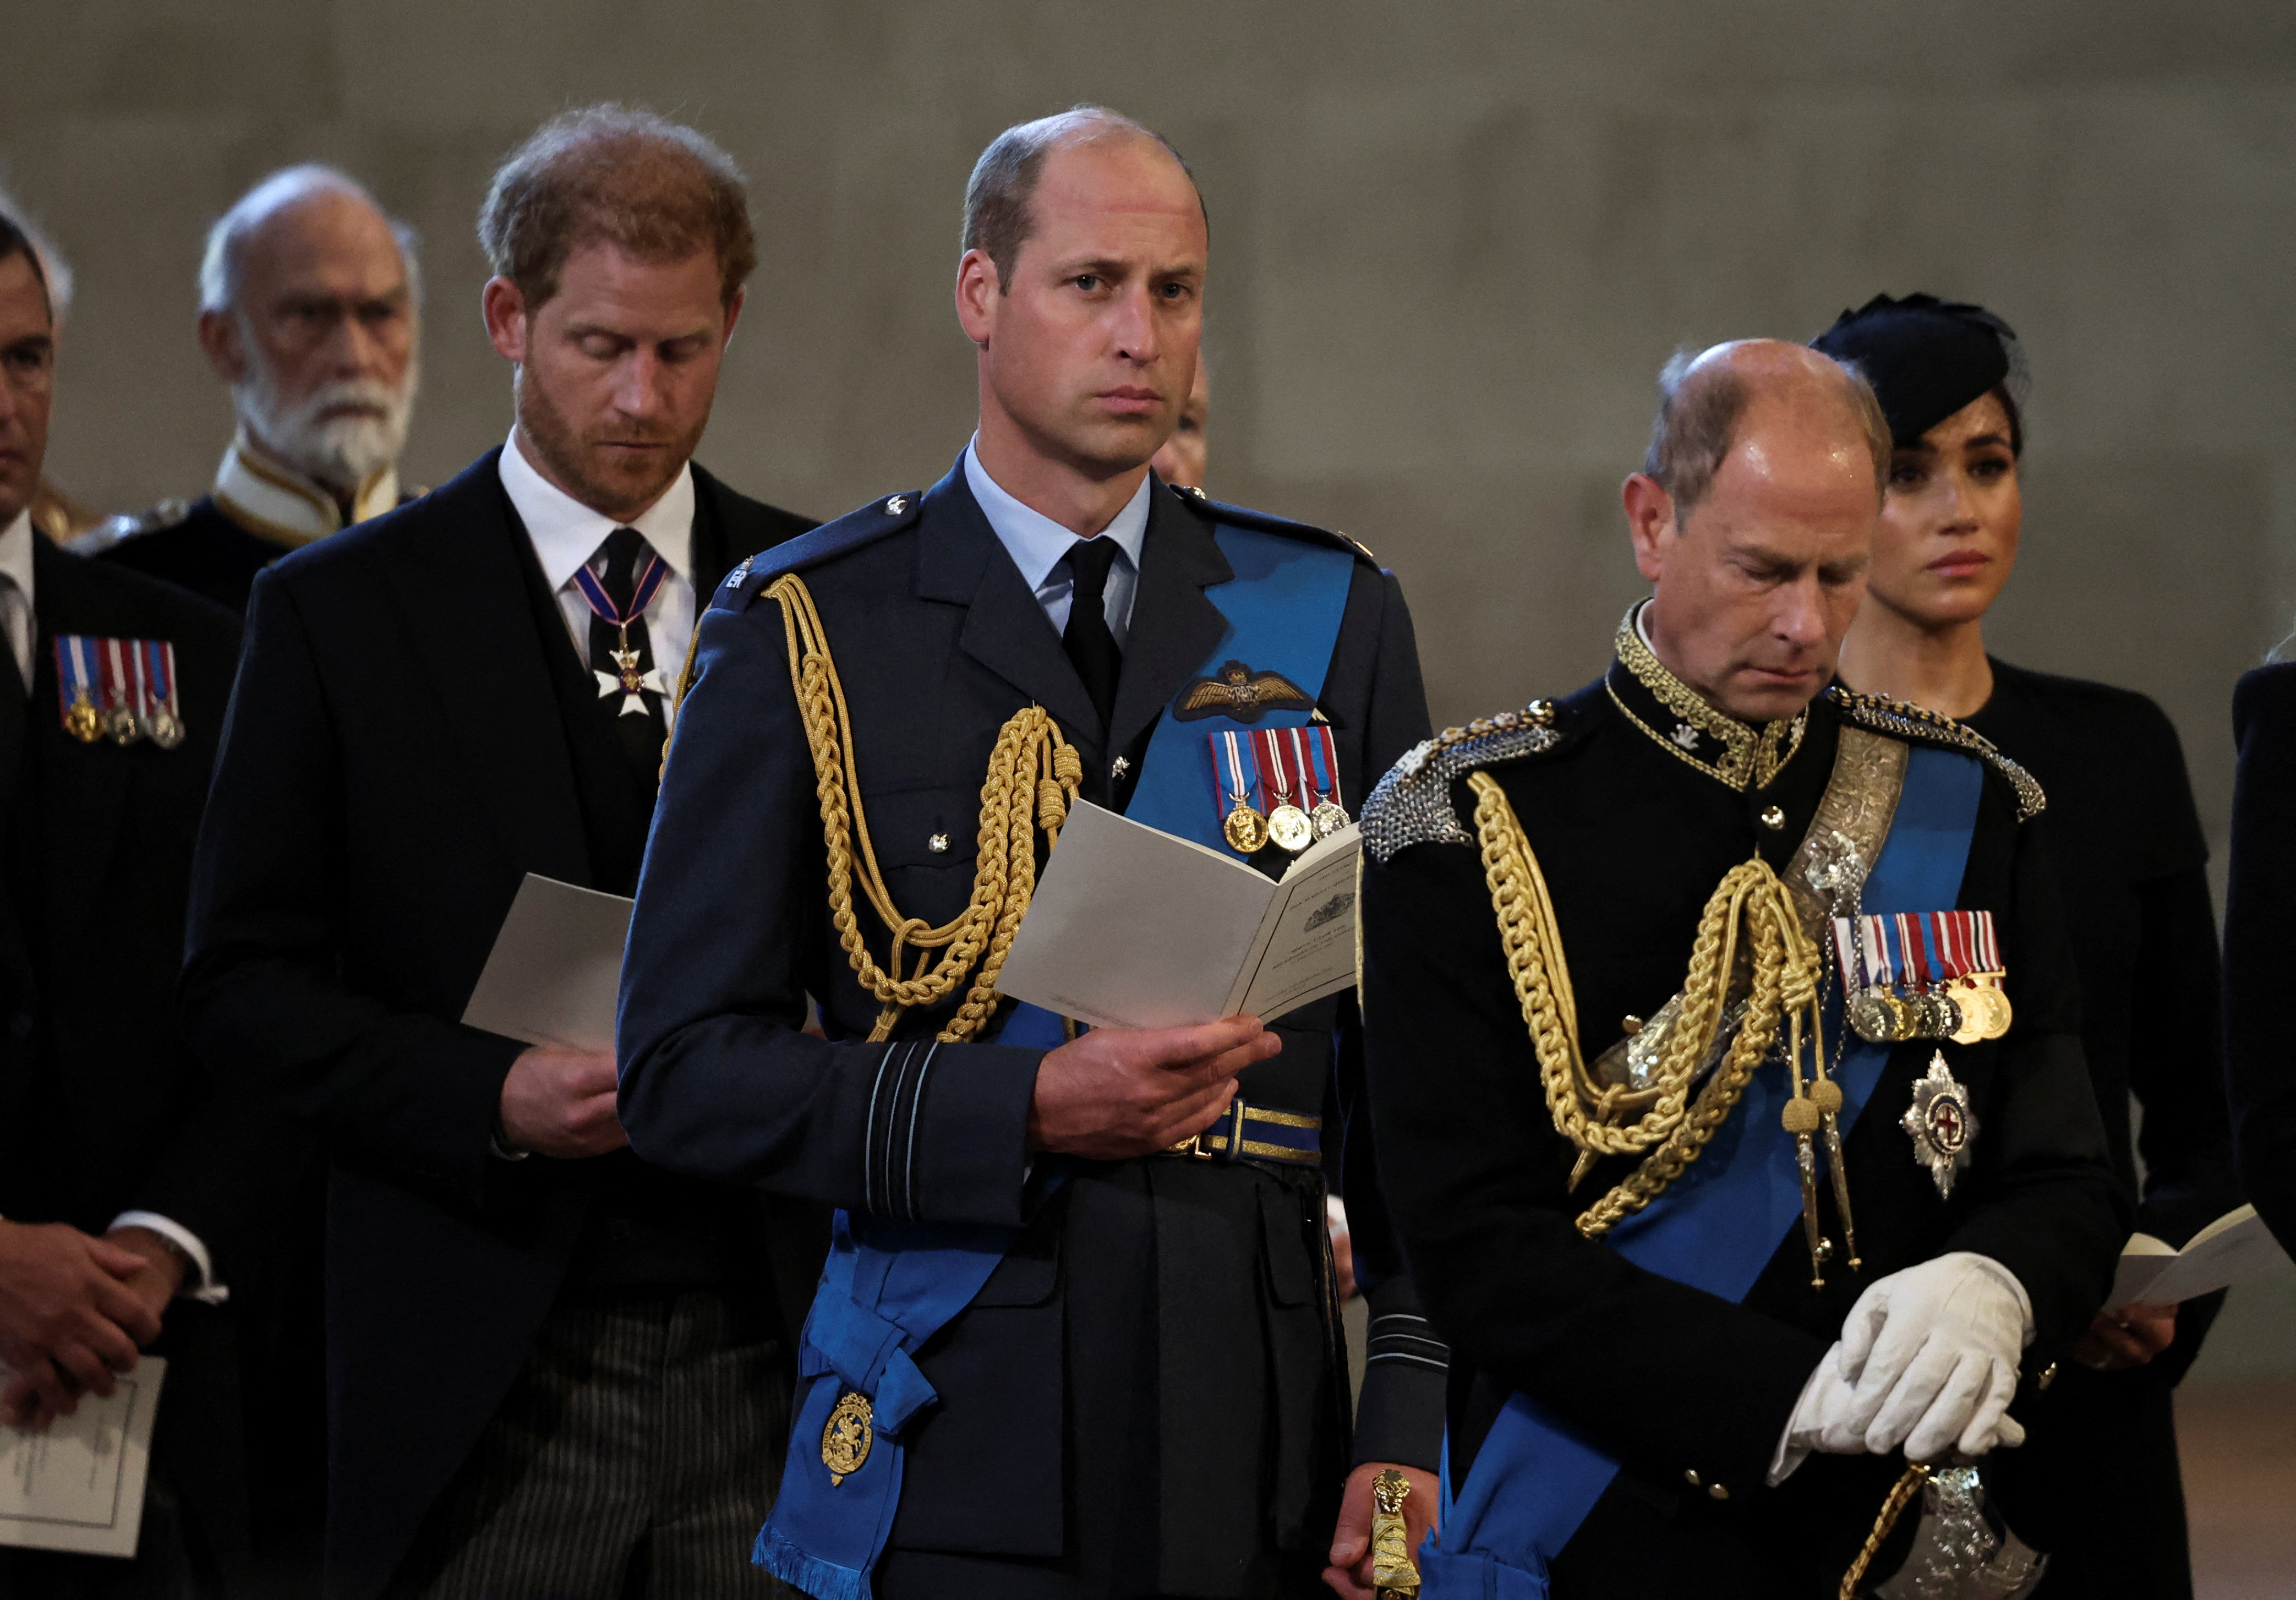 Britain's william, prince of wales, prince edward, prince harry and meghan, duchess of sussex react as britain's queen elizabeth's coffin arrives at westminster hall from buckingham palace in london